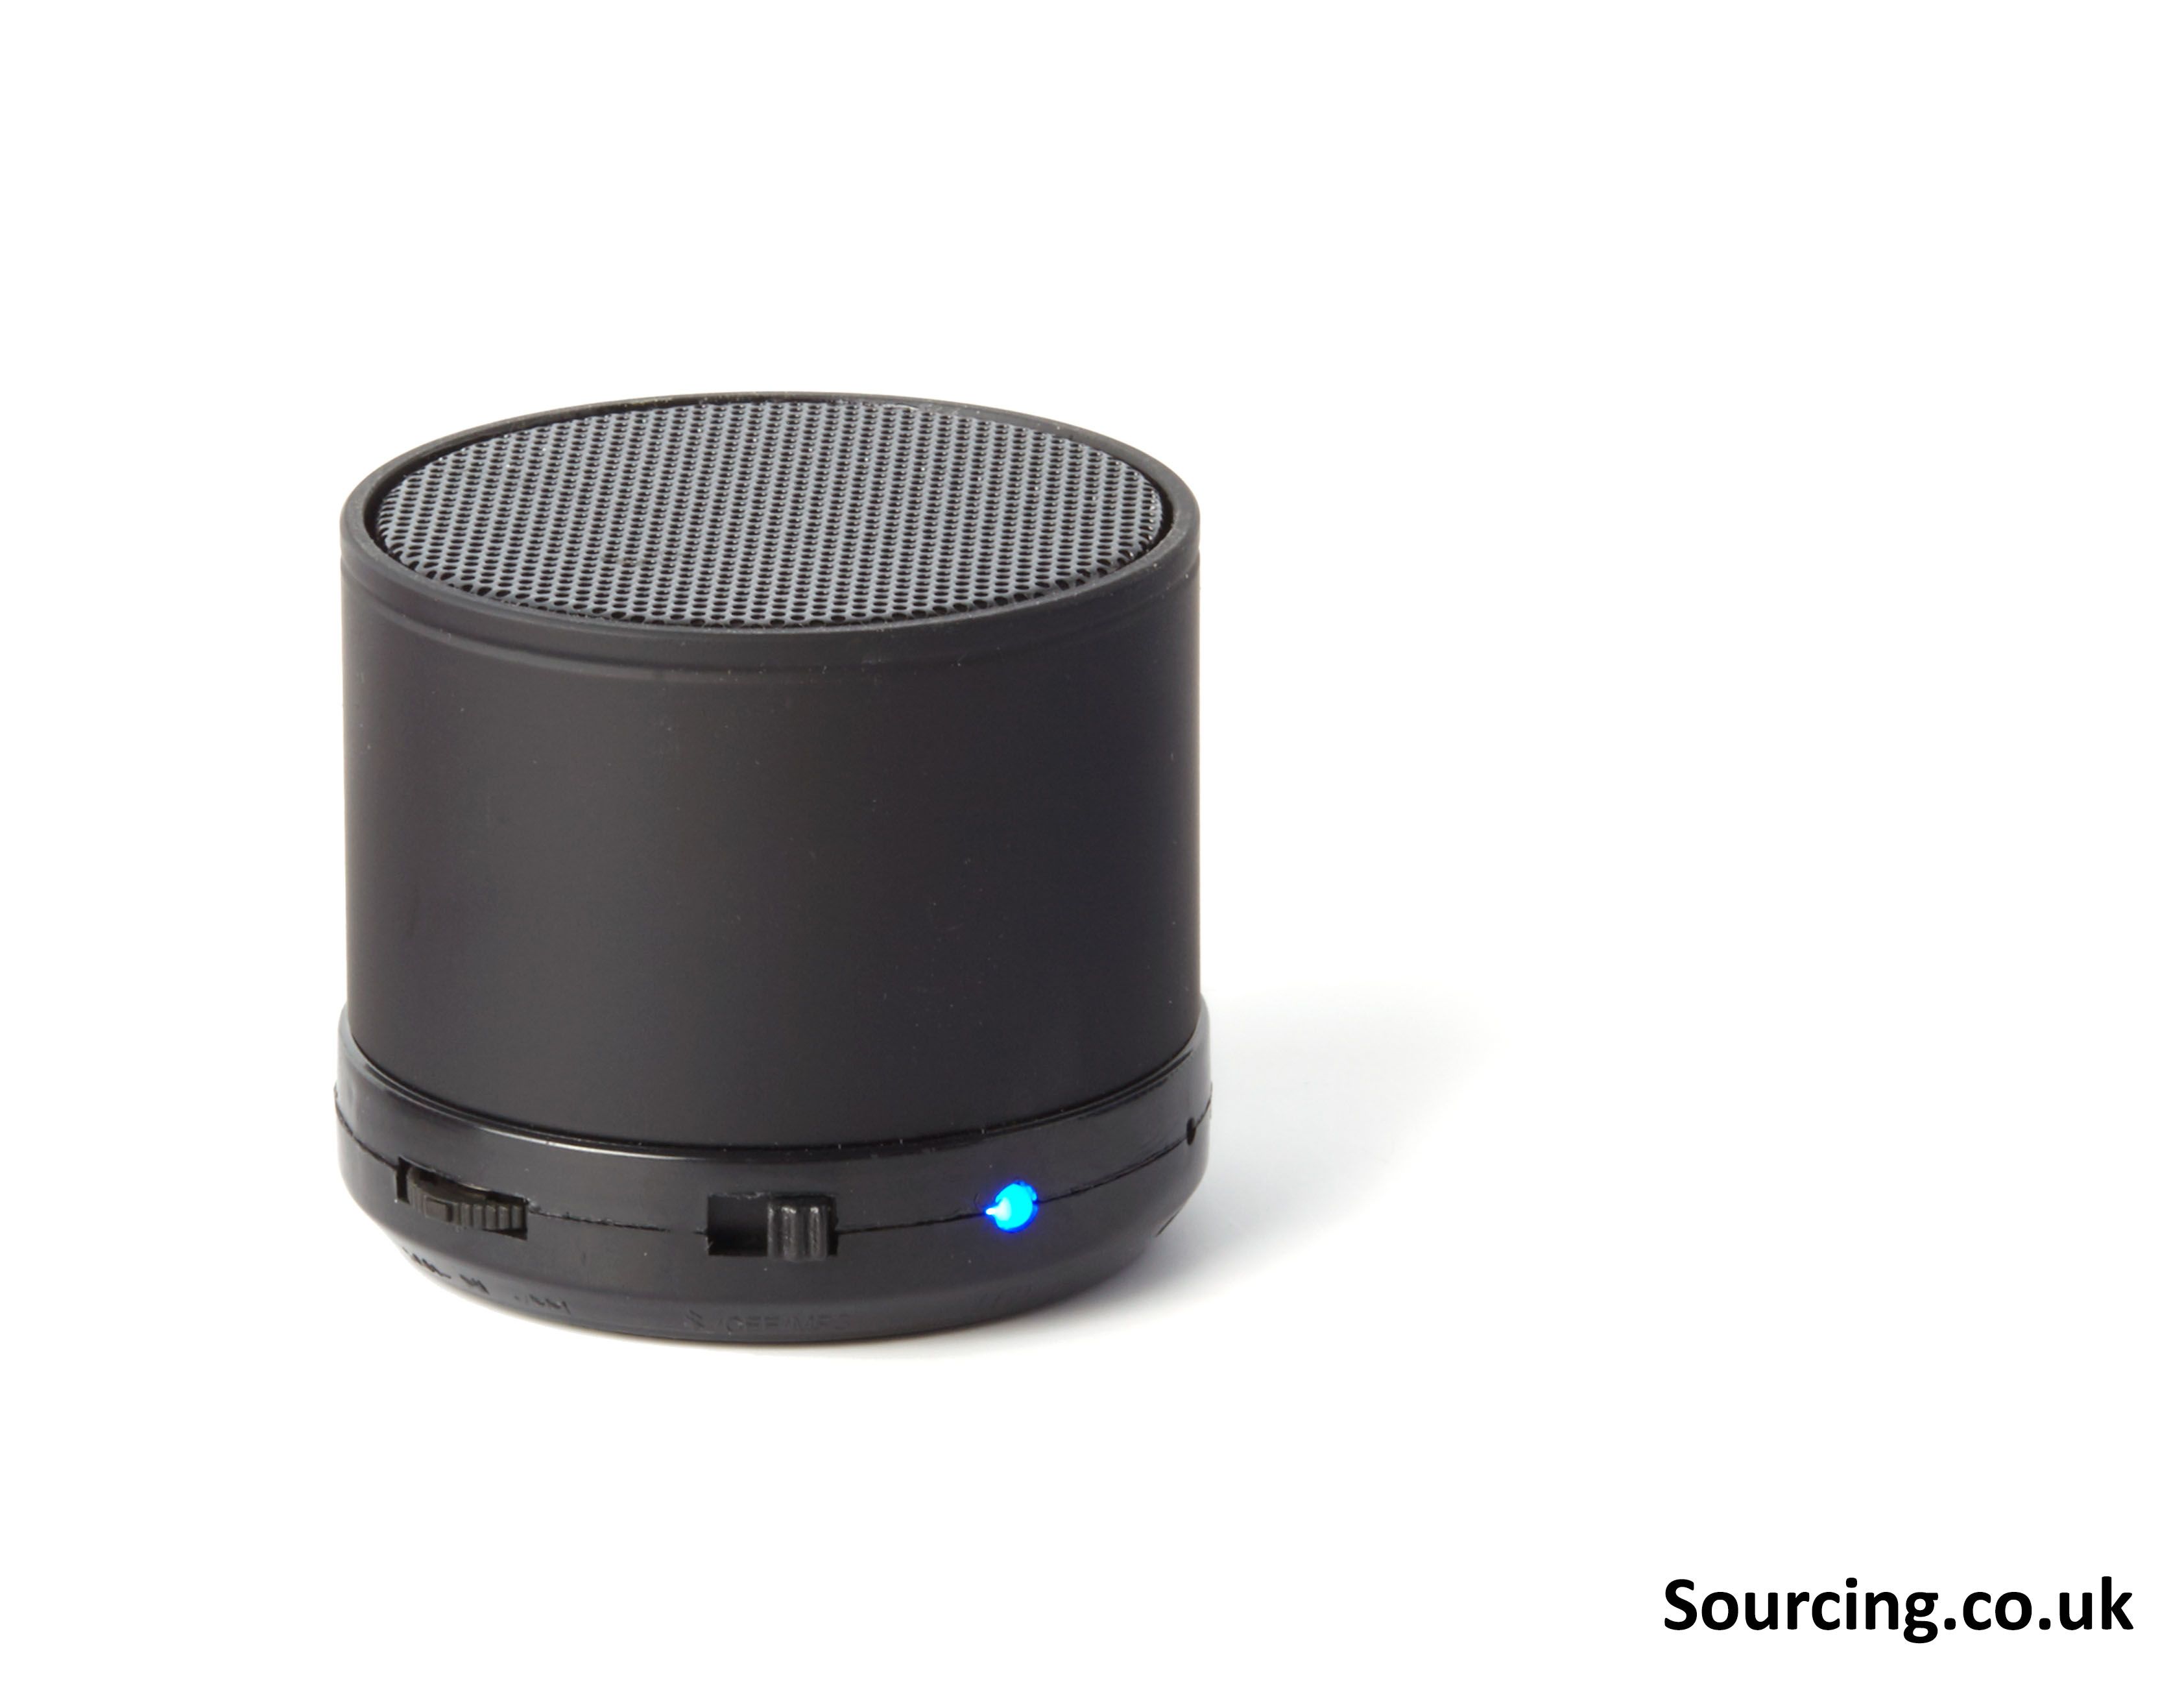 O is a cylindrical Bluetooth wireless speaker that will let you ...